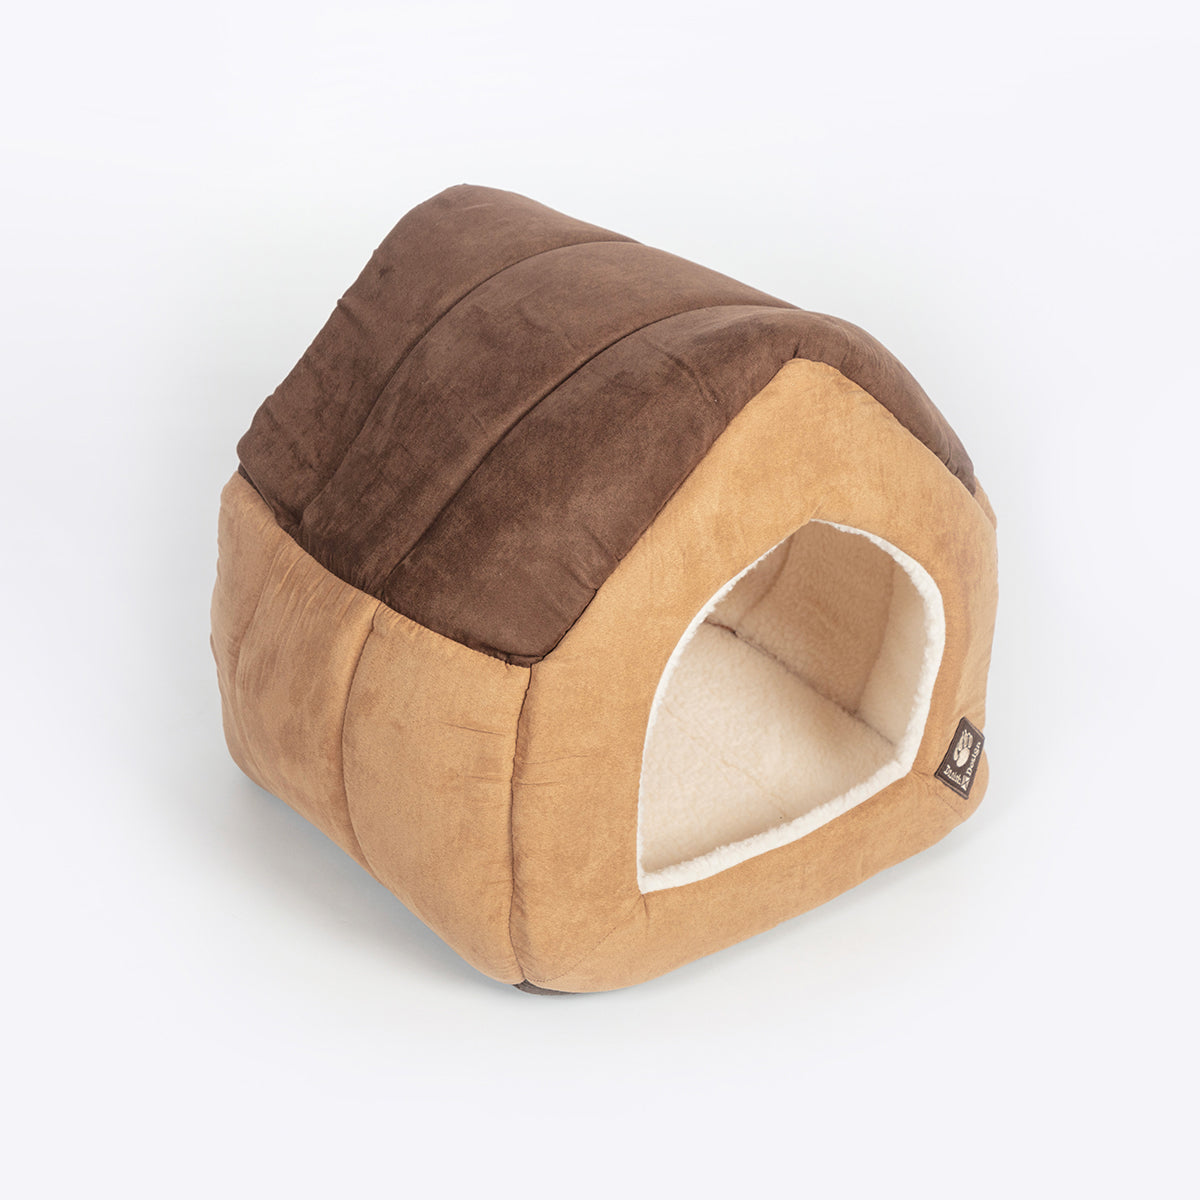 Image of Danish Design Pet House For Small Dogs - Beige - Large House